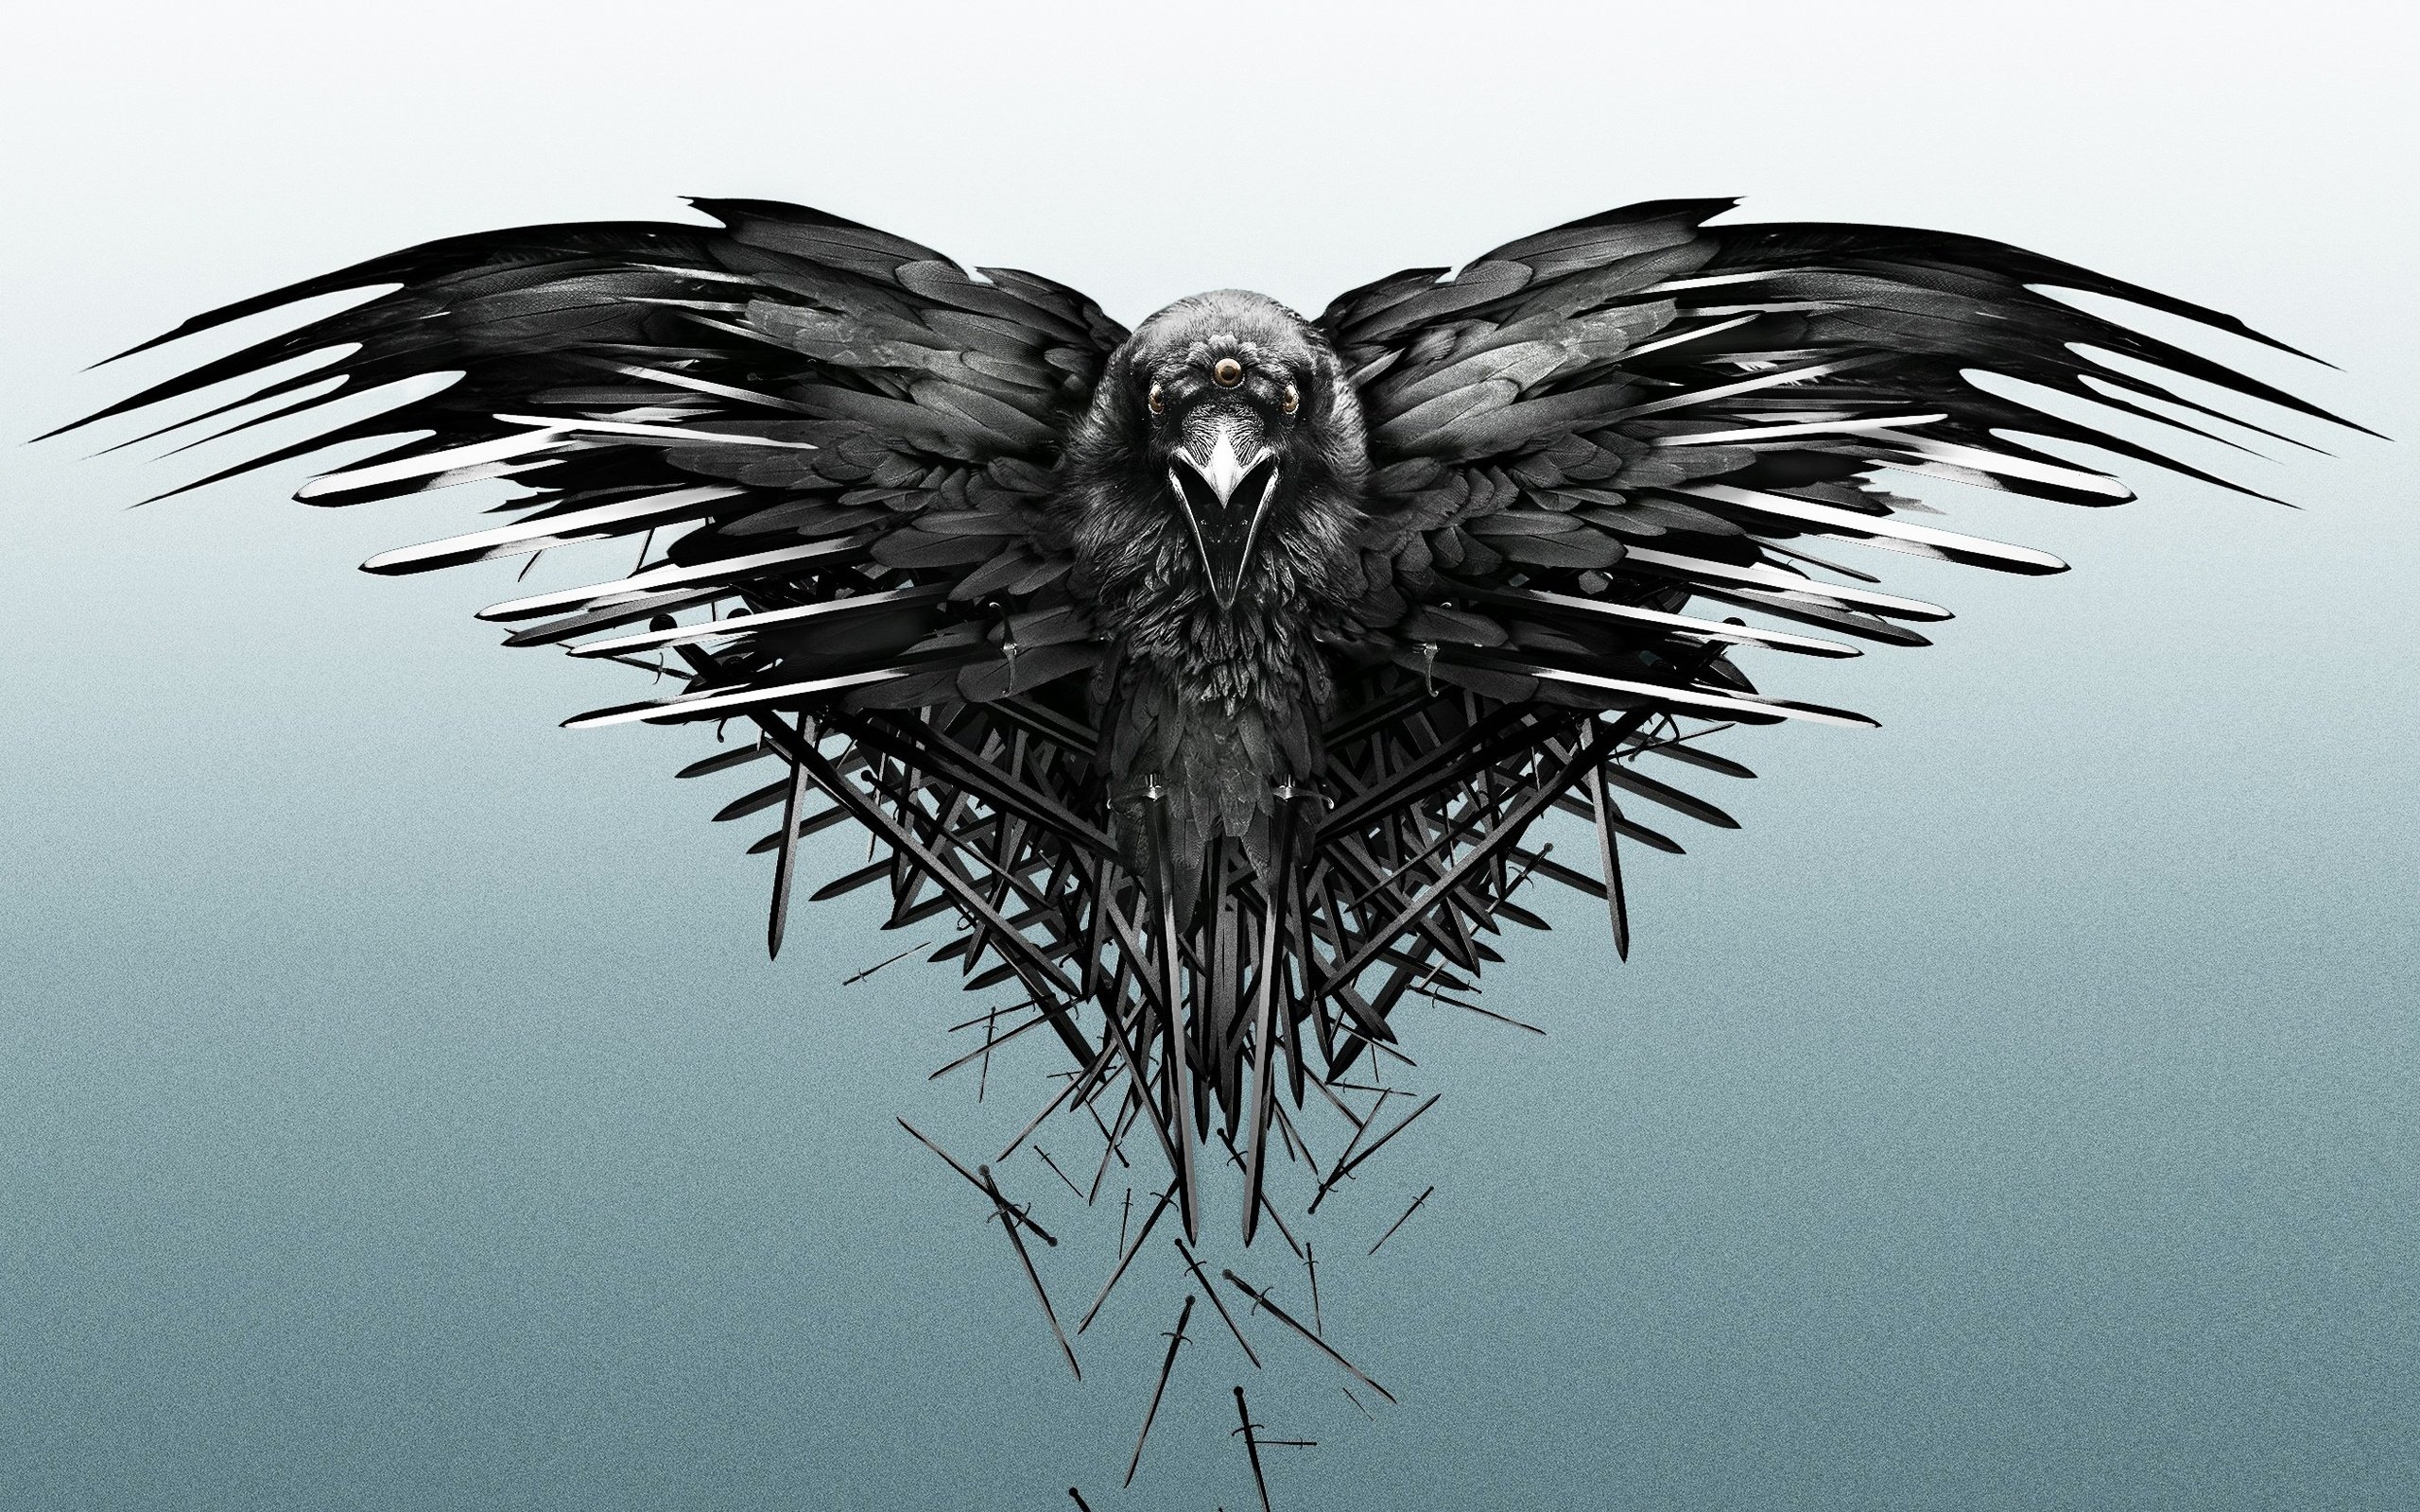 Game of Thrones Season 4 Wallpapers HD Wallpapers 2560x1600